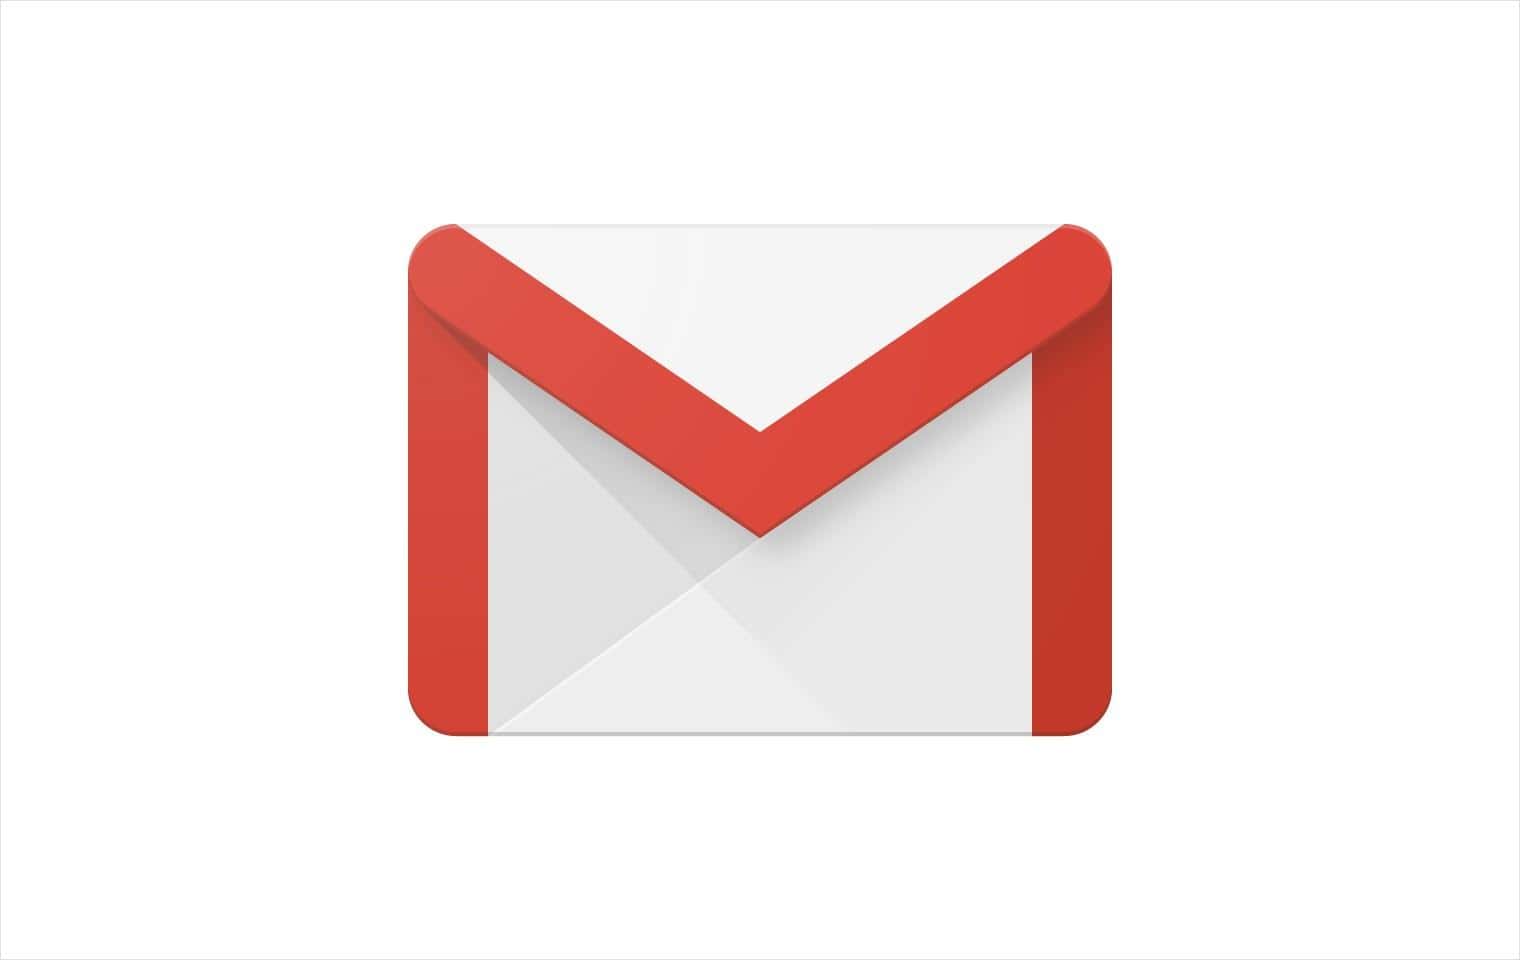 Gmail for Android - Download the APK from Uptodown